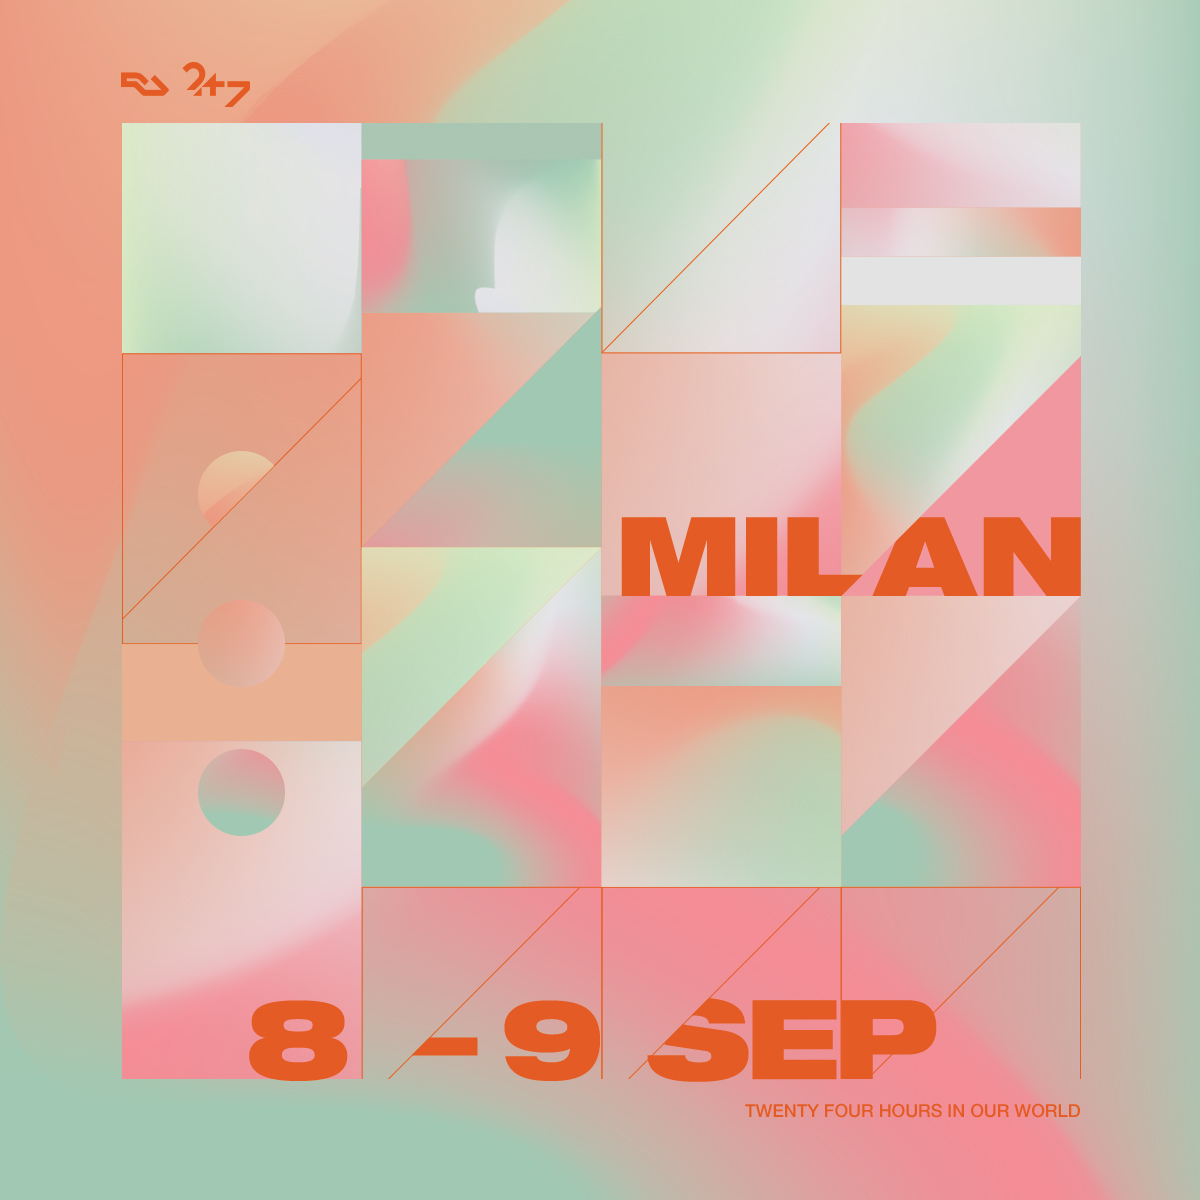 Listen to a playlist of mixes ahead of 24/7 Milan image